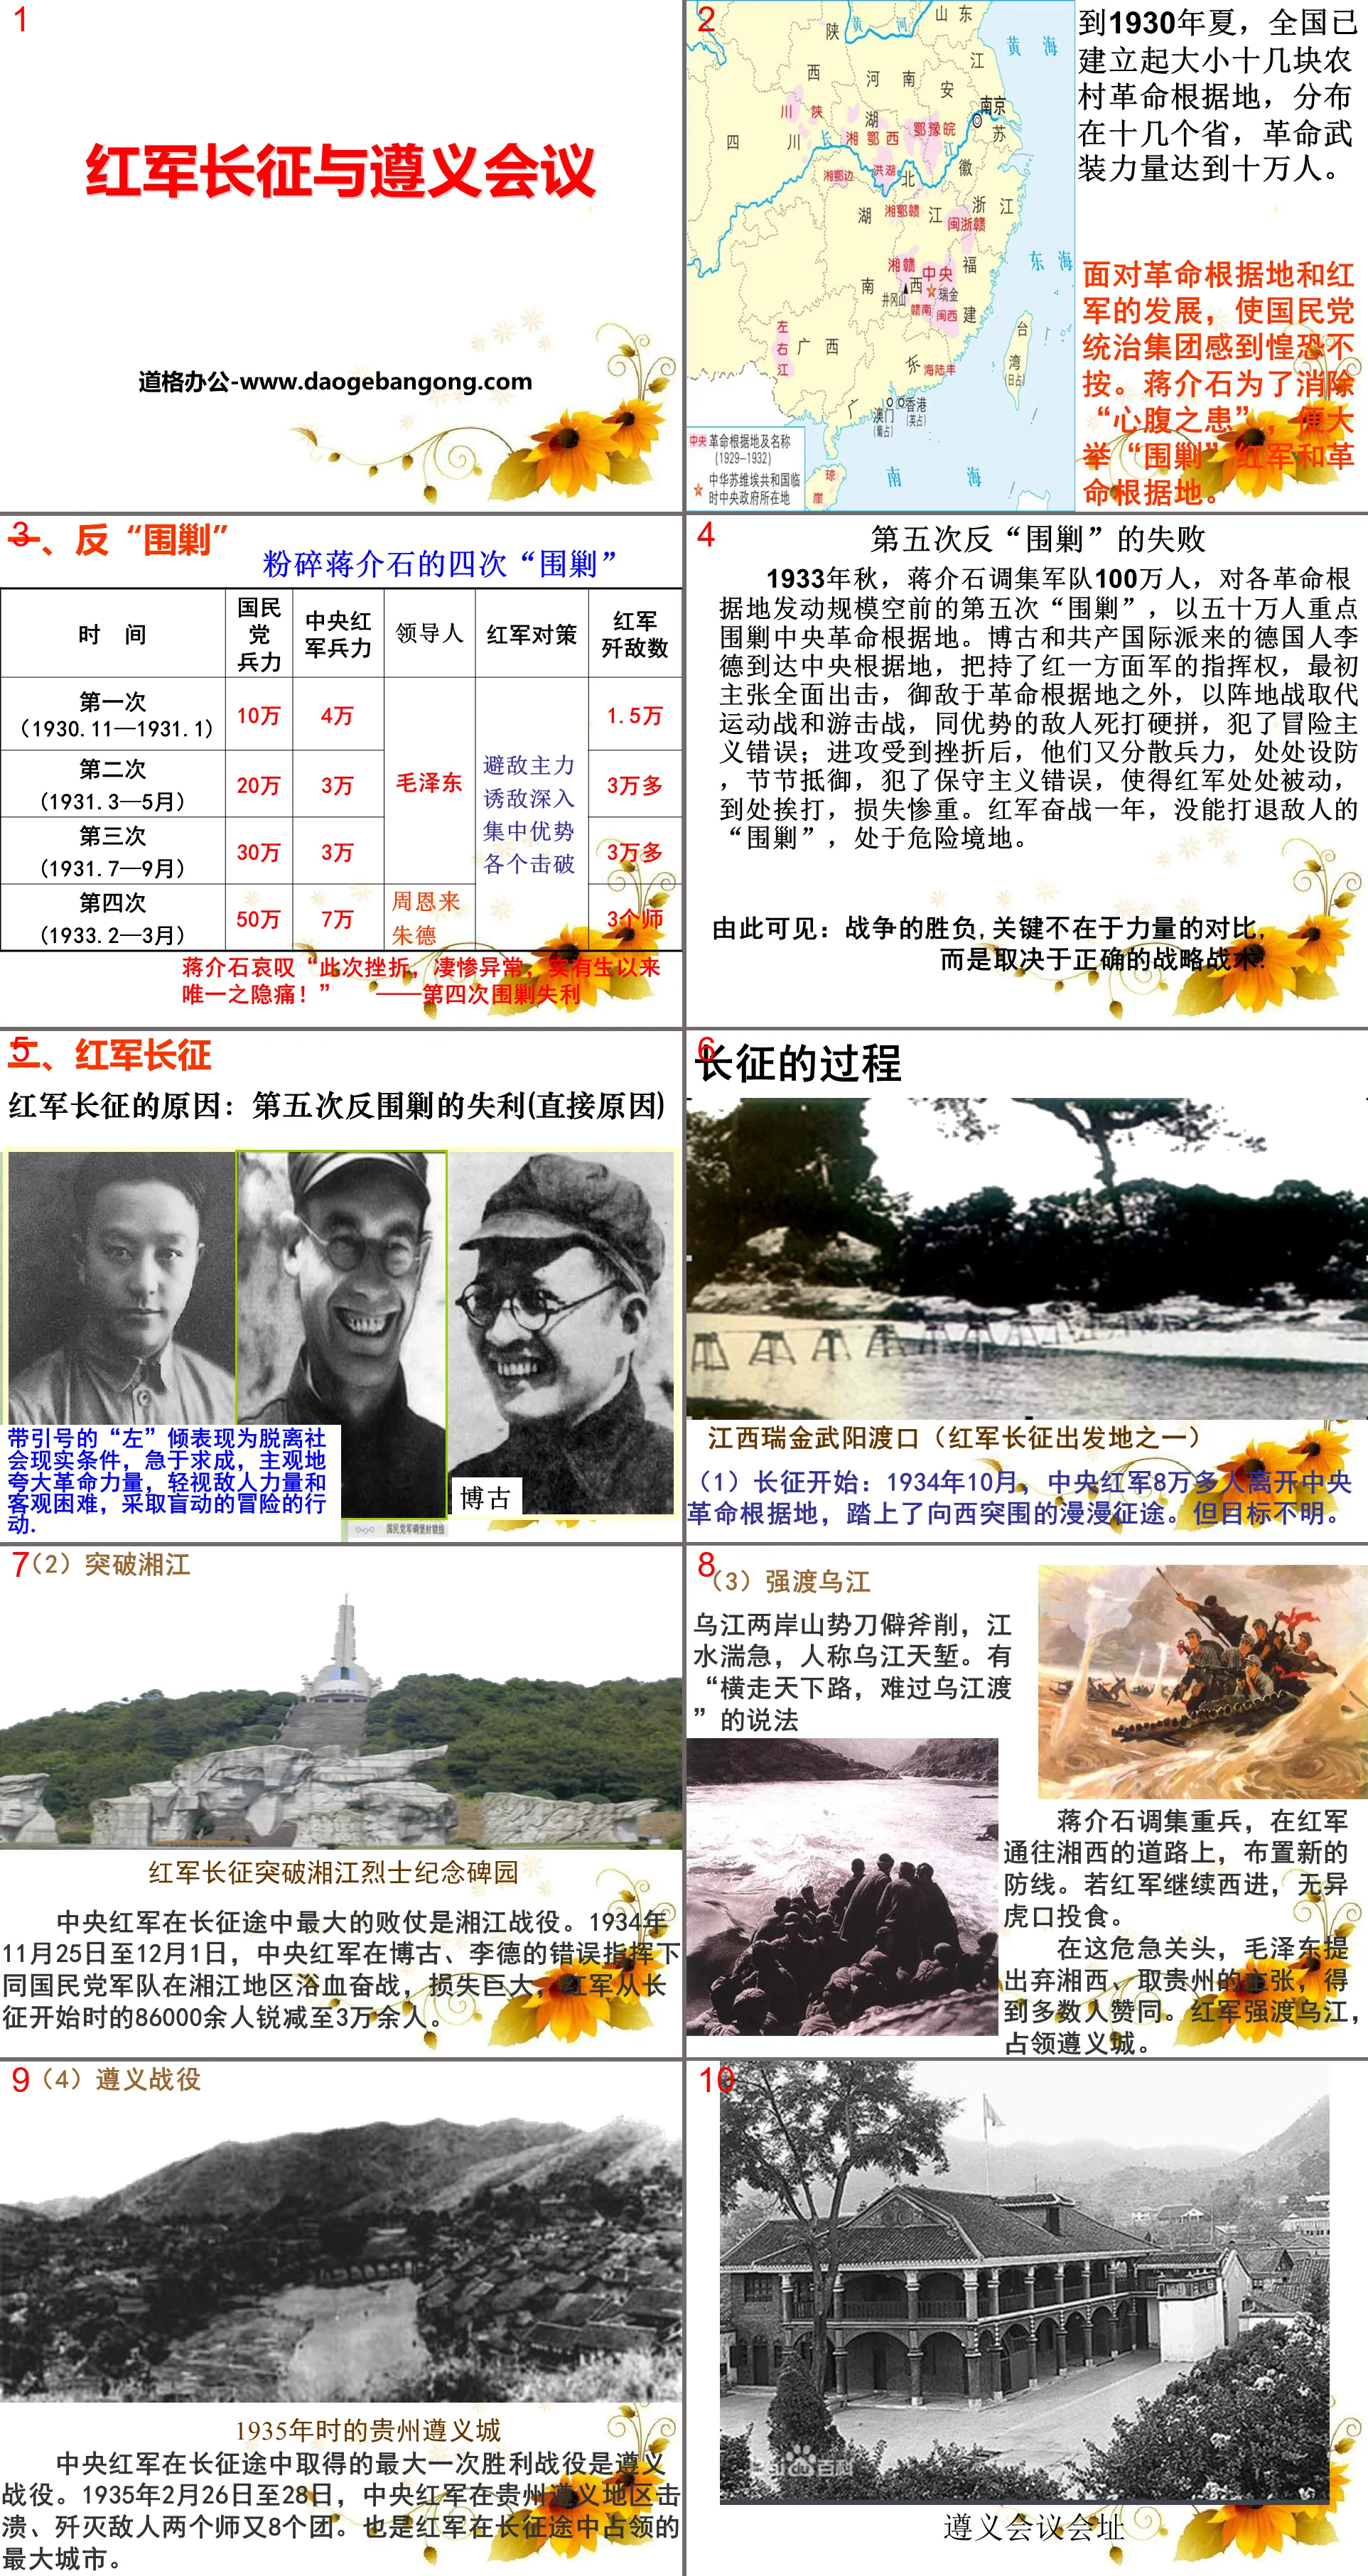 "The Red Army's Long March and Zunyi Conference" opens up a new development path PPT courseware